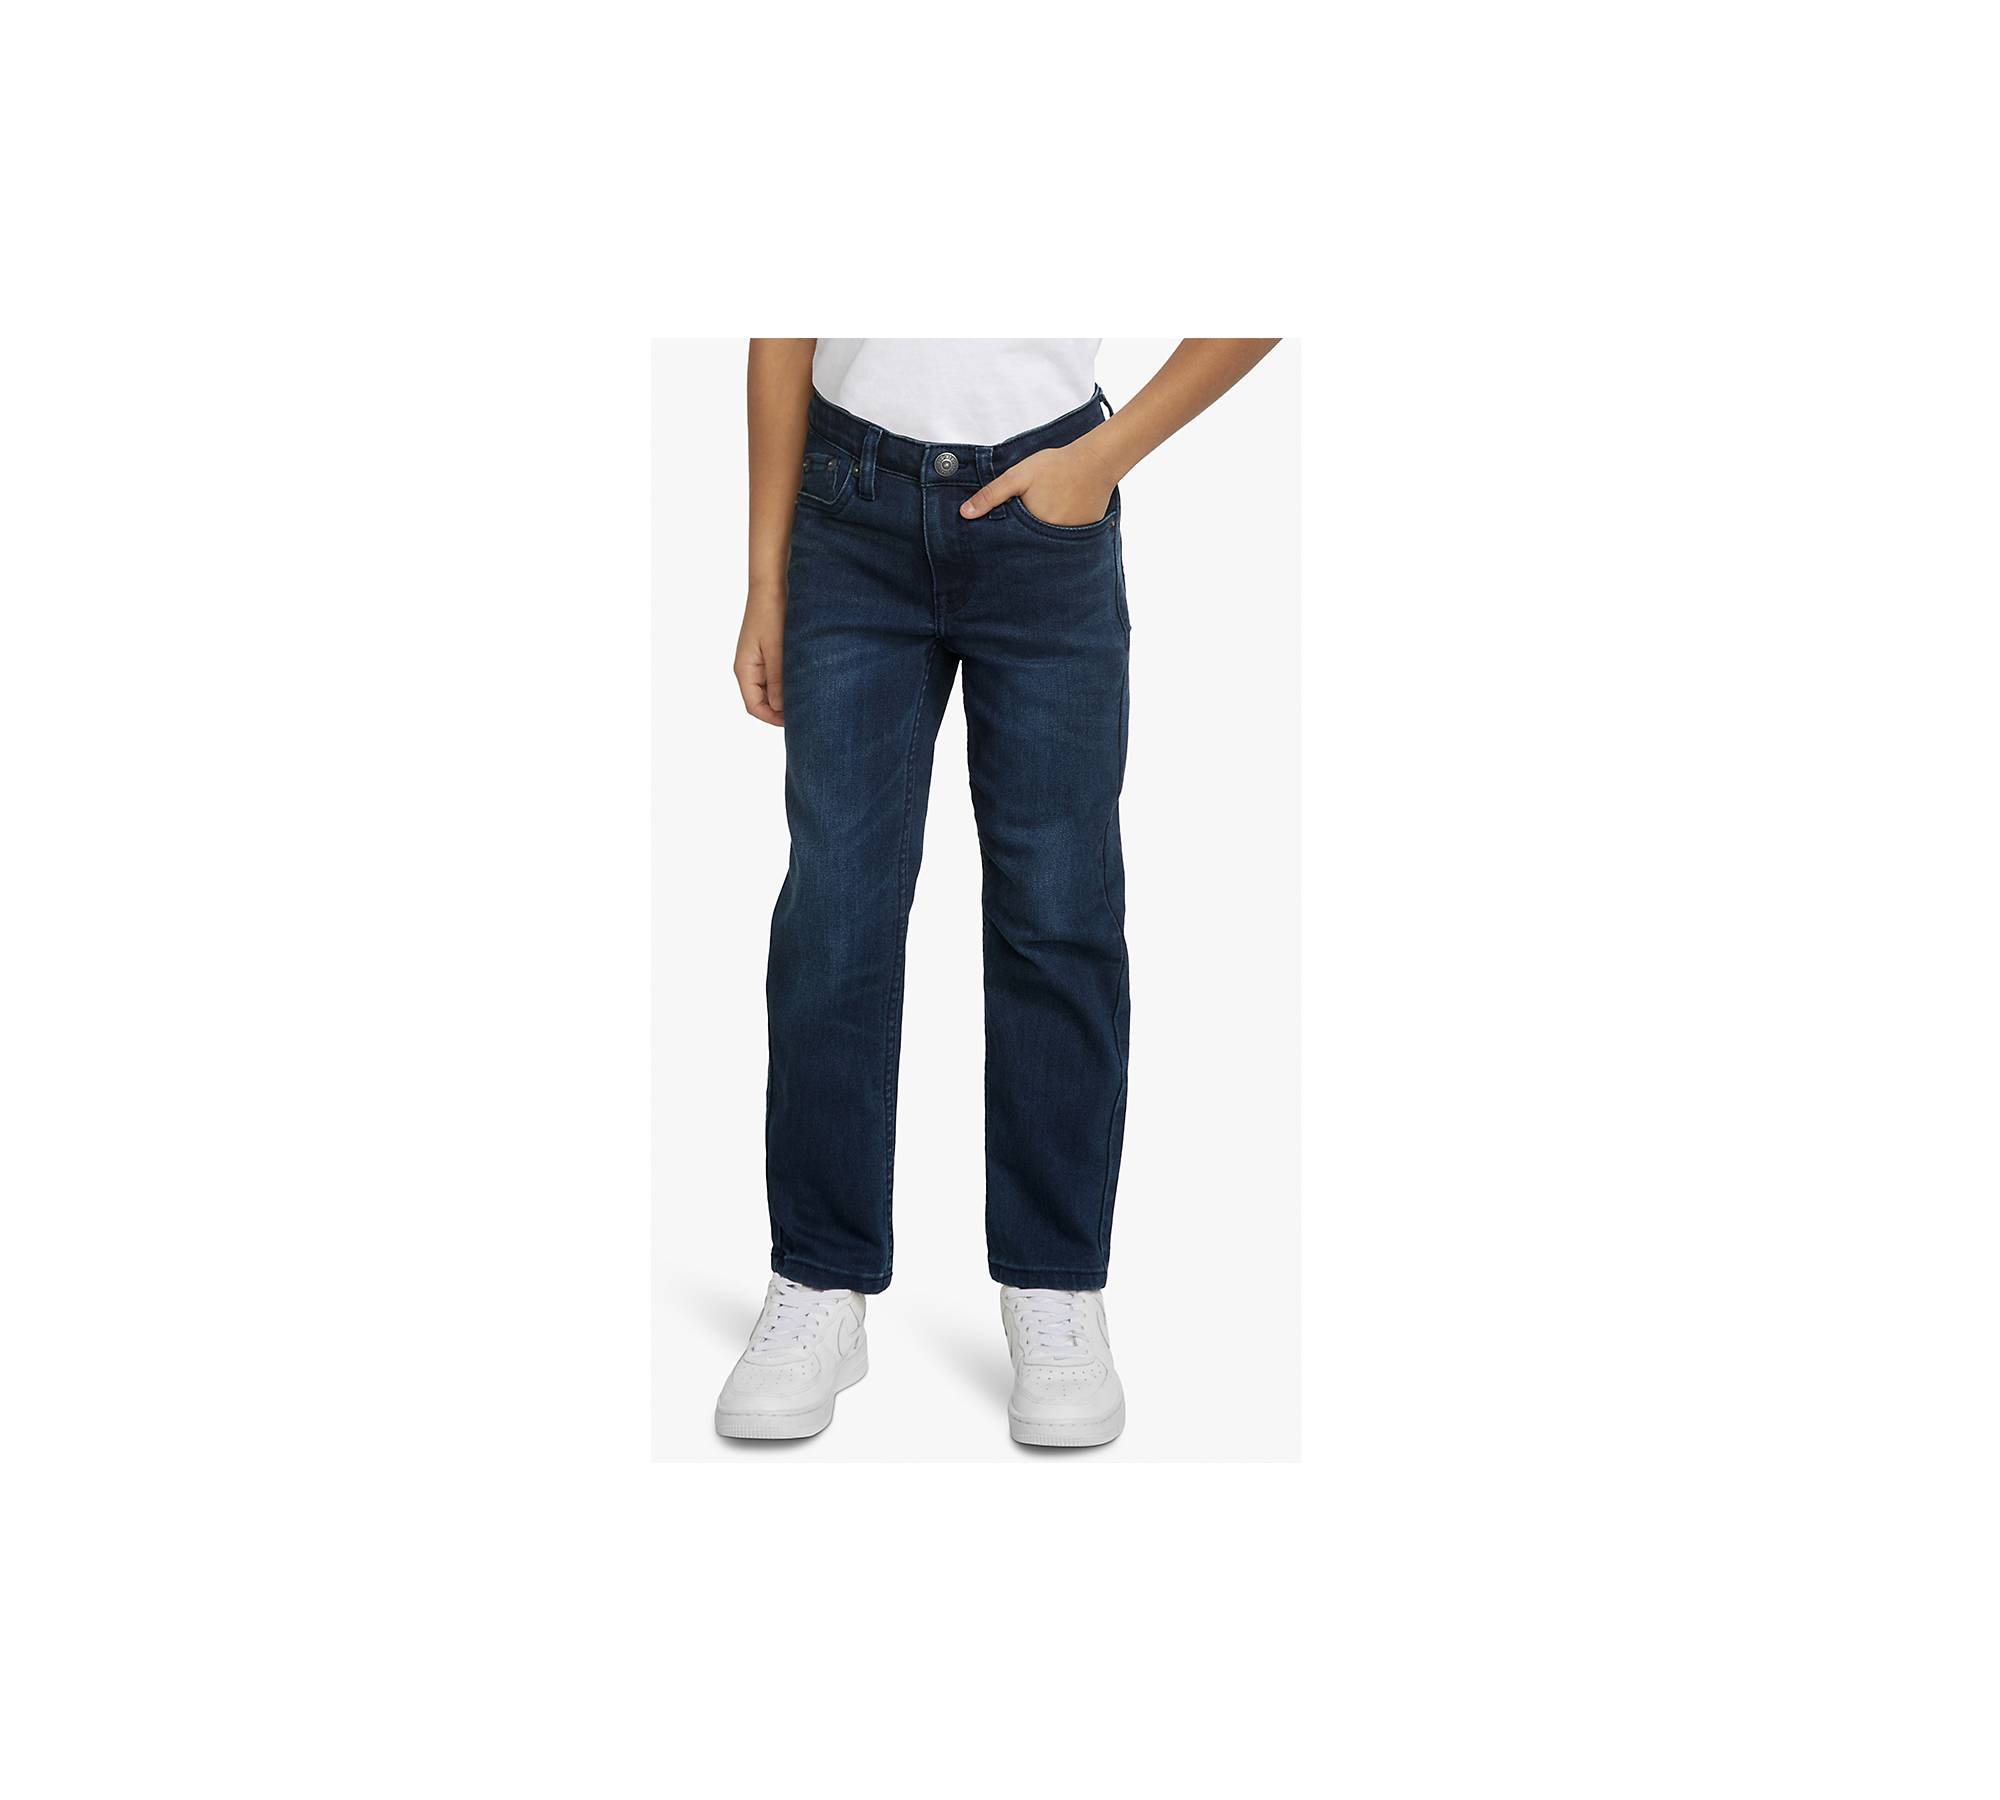 502™ Taper Fit Strong Performance Jeans Little Boys 4-7x - Dark